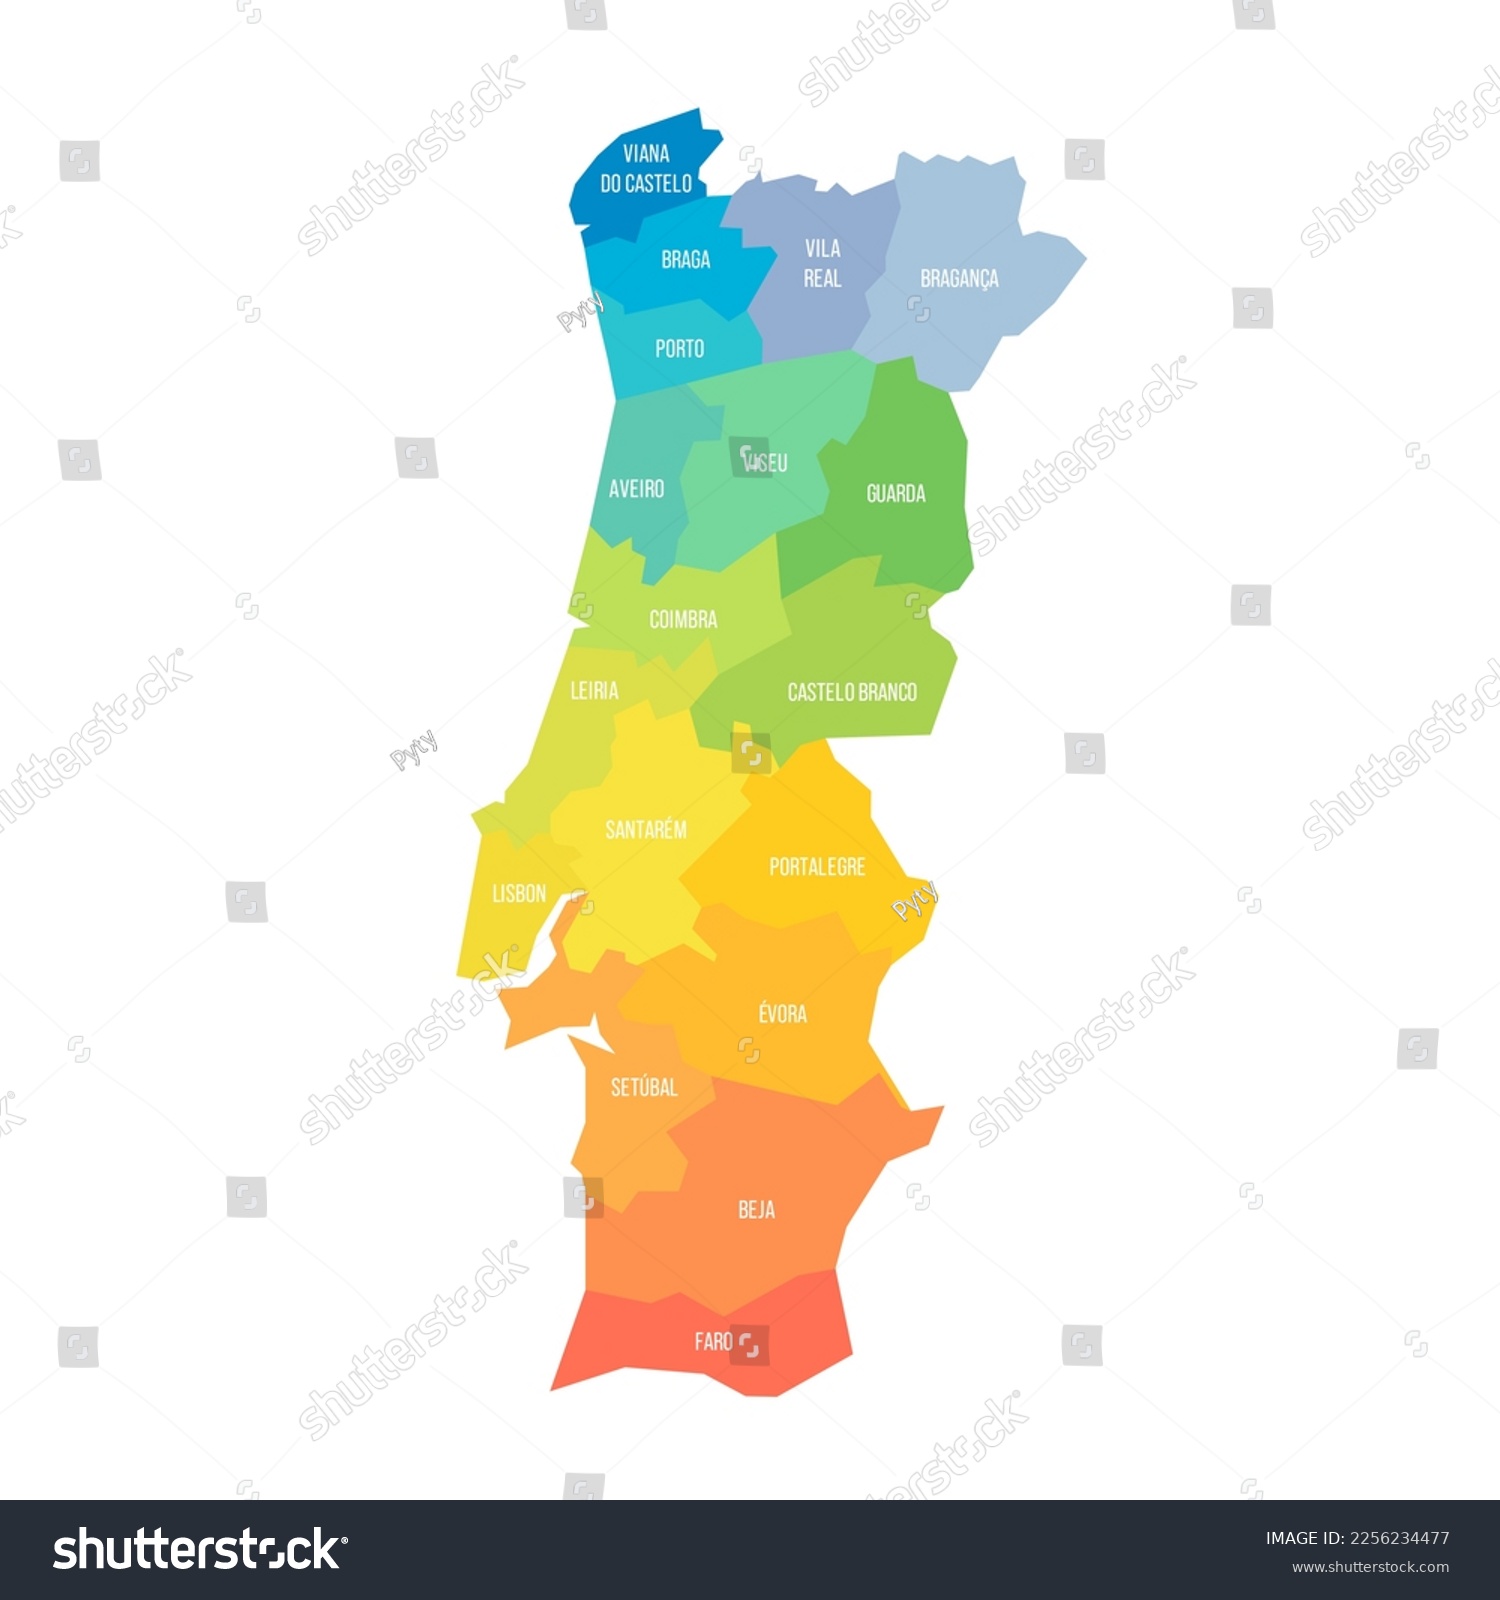 Portugal Political Map Of Administrative Royalty Free Stock Vector 2256234477 6513